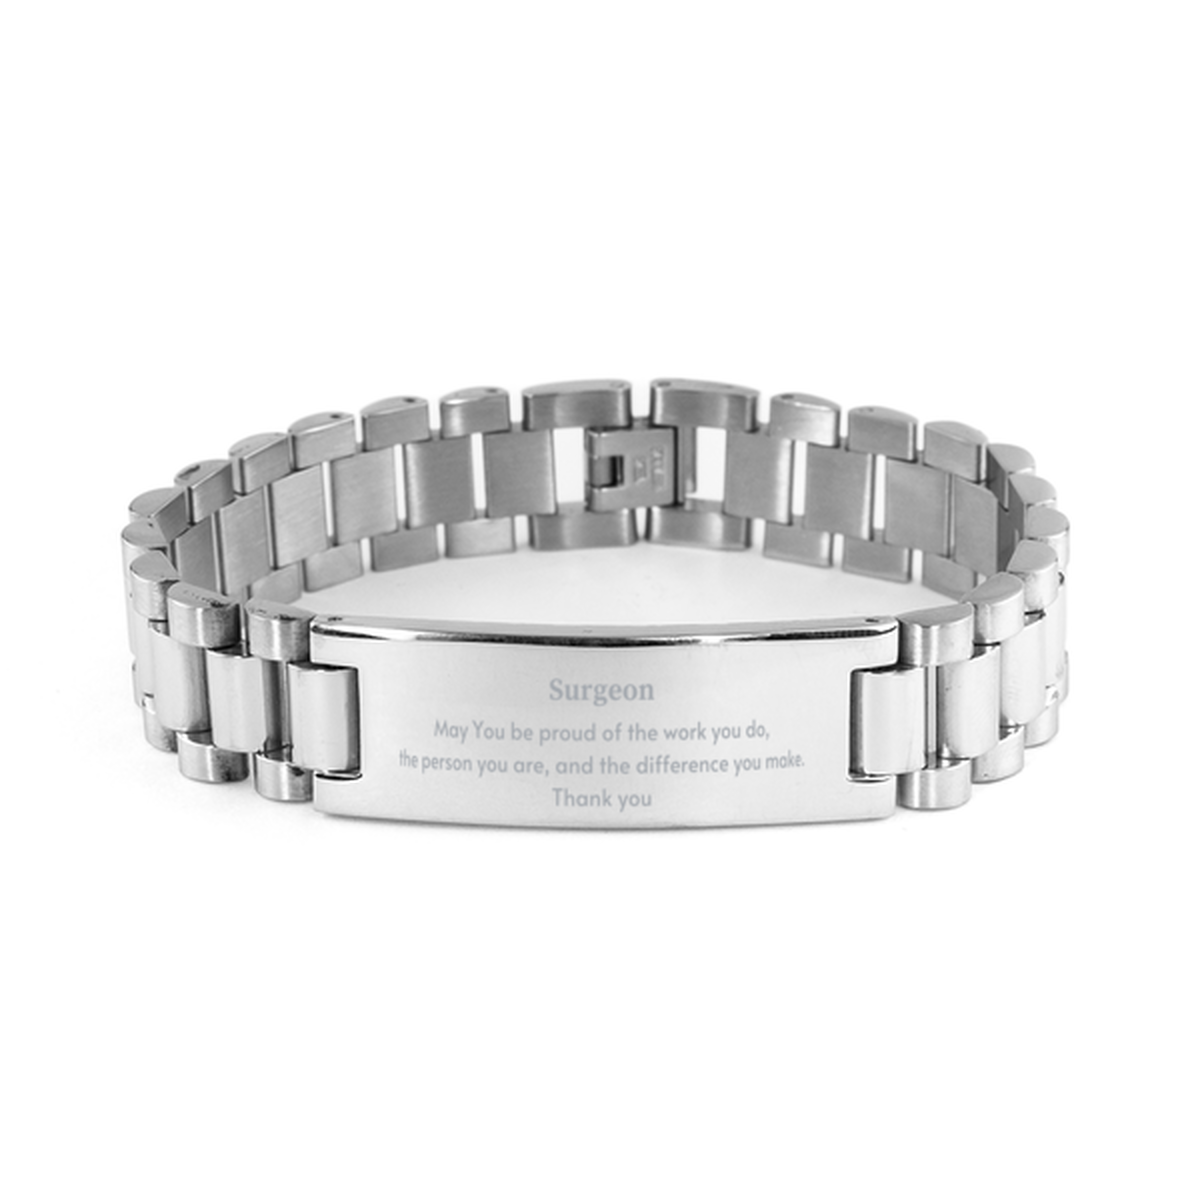 Heartwarming Ladder Stainless Steel Bracelet Retirement Coworkers Gifts for Surgeon, Surgeon May You be proud of the work you do, the person you are Gifts for Boss Men Women Friends